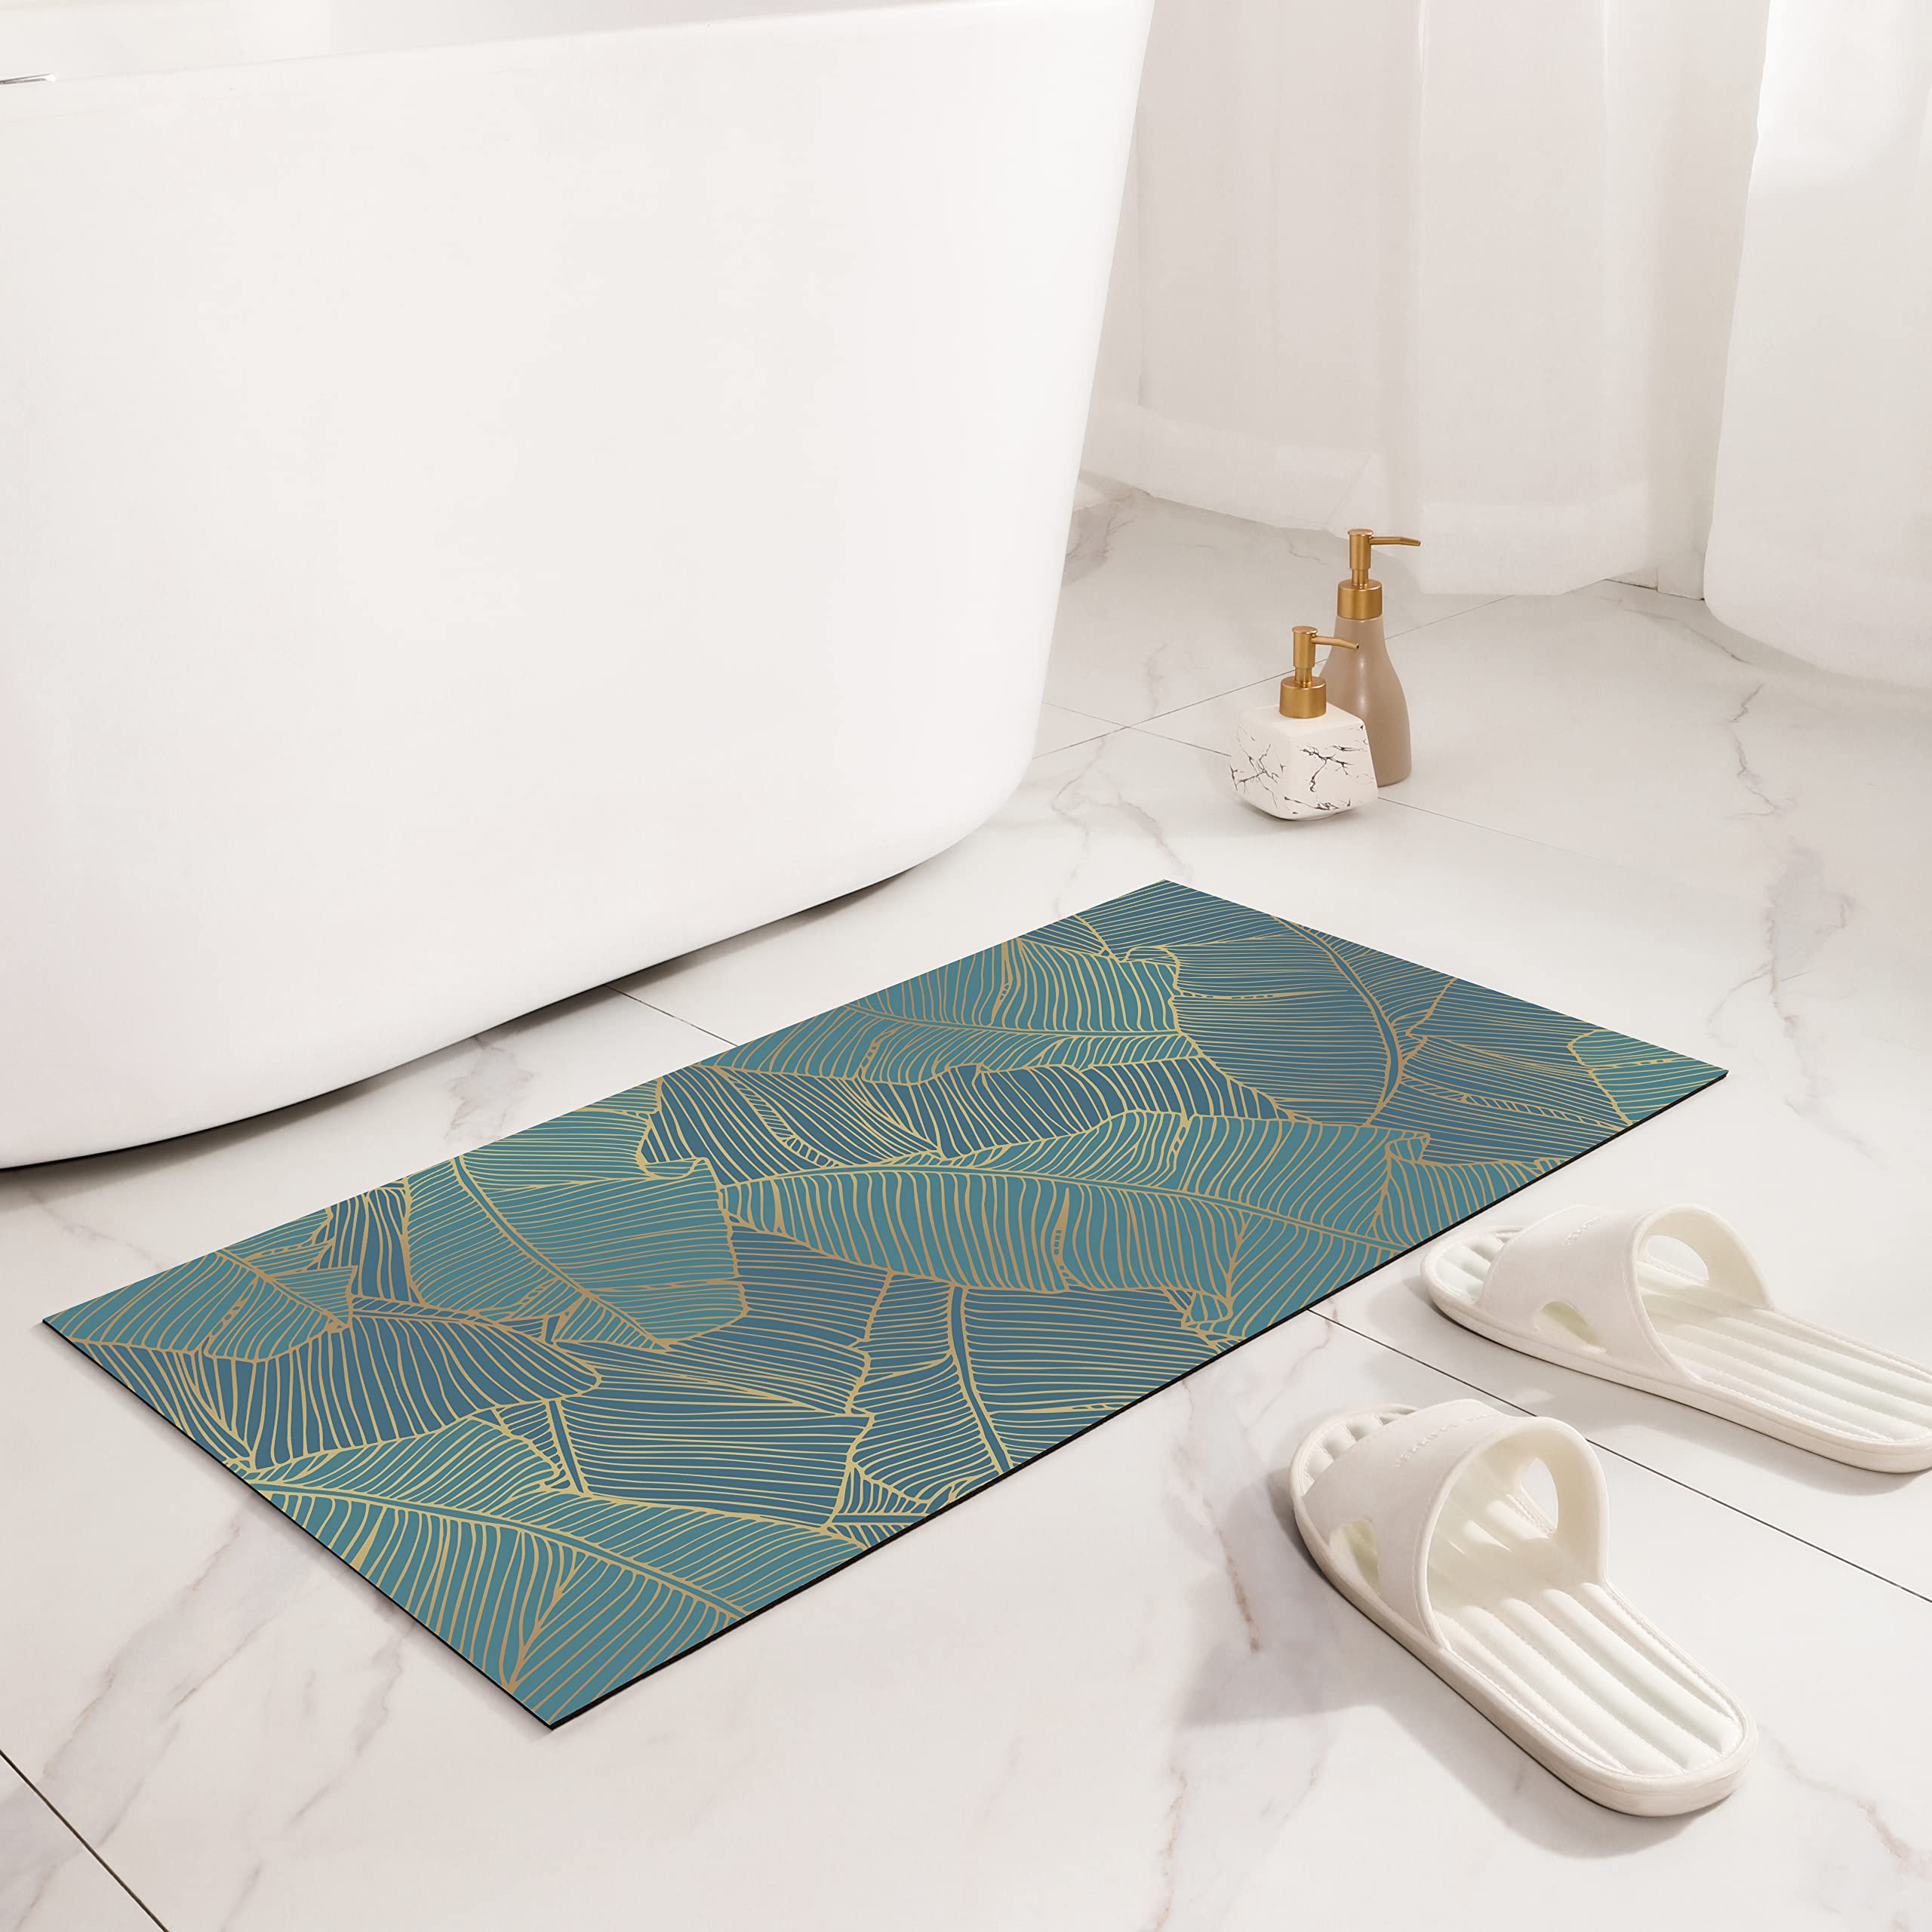 YIHOUSE Quick Dry Bath Mat for Bathroom Thin Non Slip Absorbent Shower Rug  16 x 24 golden Leaf